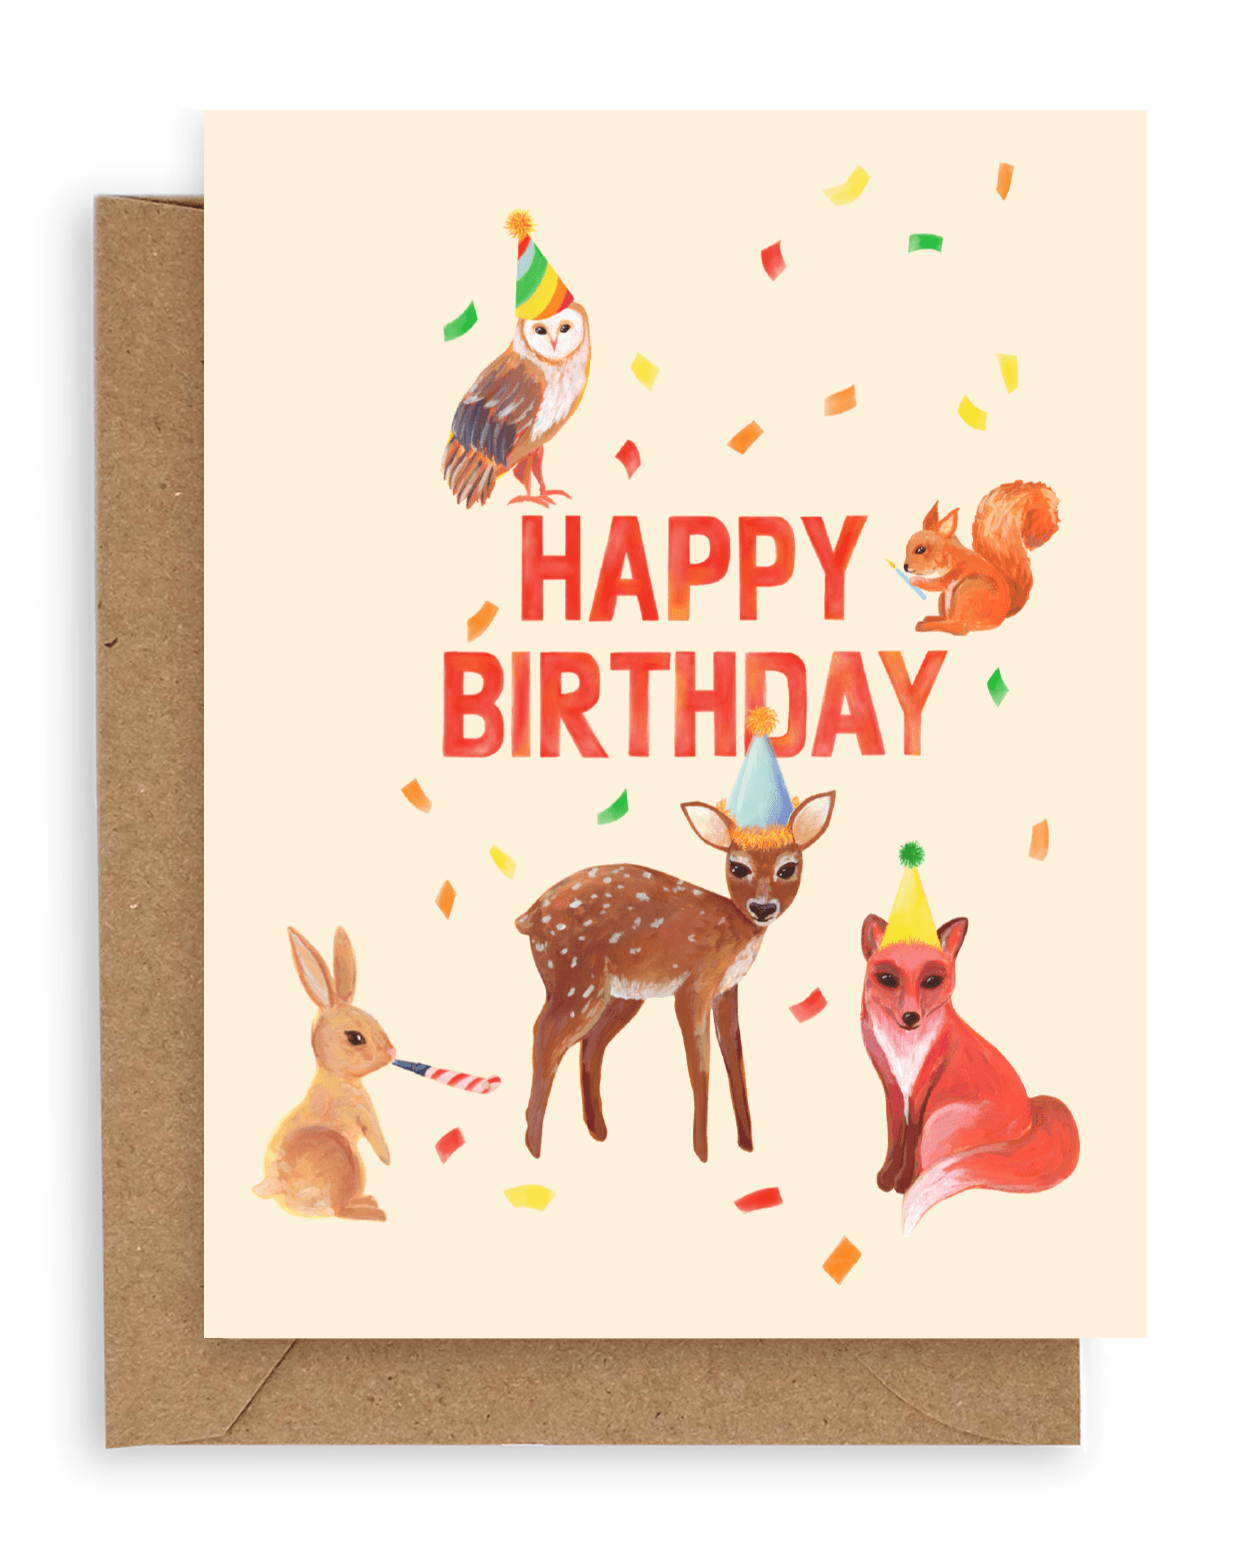 Forest creatures design with confetti, an owl, fox, fawn, rabbit, and squirrel in birthday hats surrounding the words &quot;happy birthday&quot; in red printed on a cream colored background. Shown with kraft envelope.